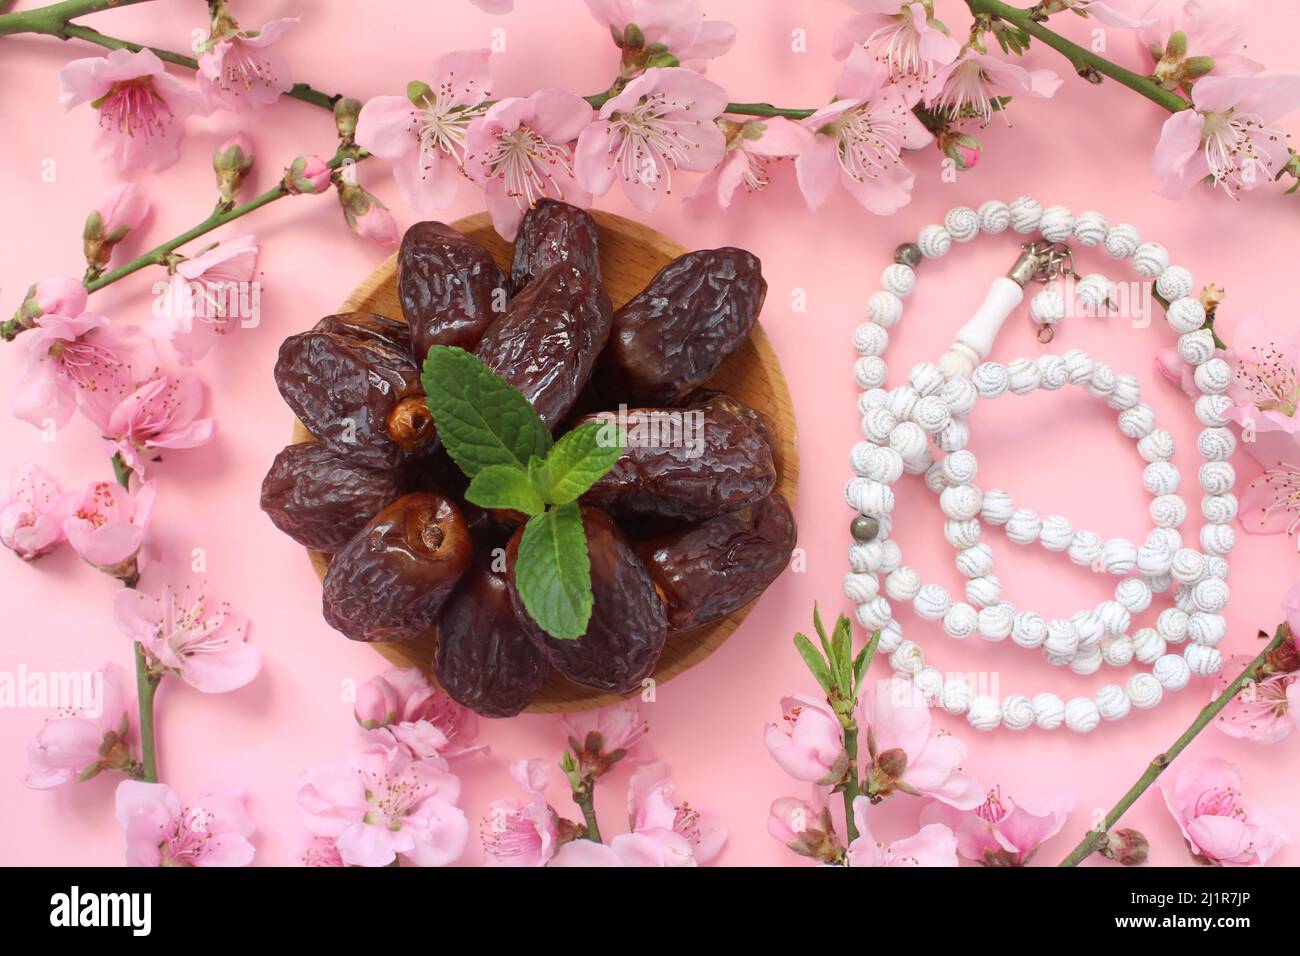 Date fruits in wooden plate and white prayer beads isolated on pink background. Ramadhan concept idea. flower frame. close up, top view. Stock Photo